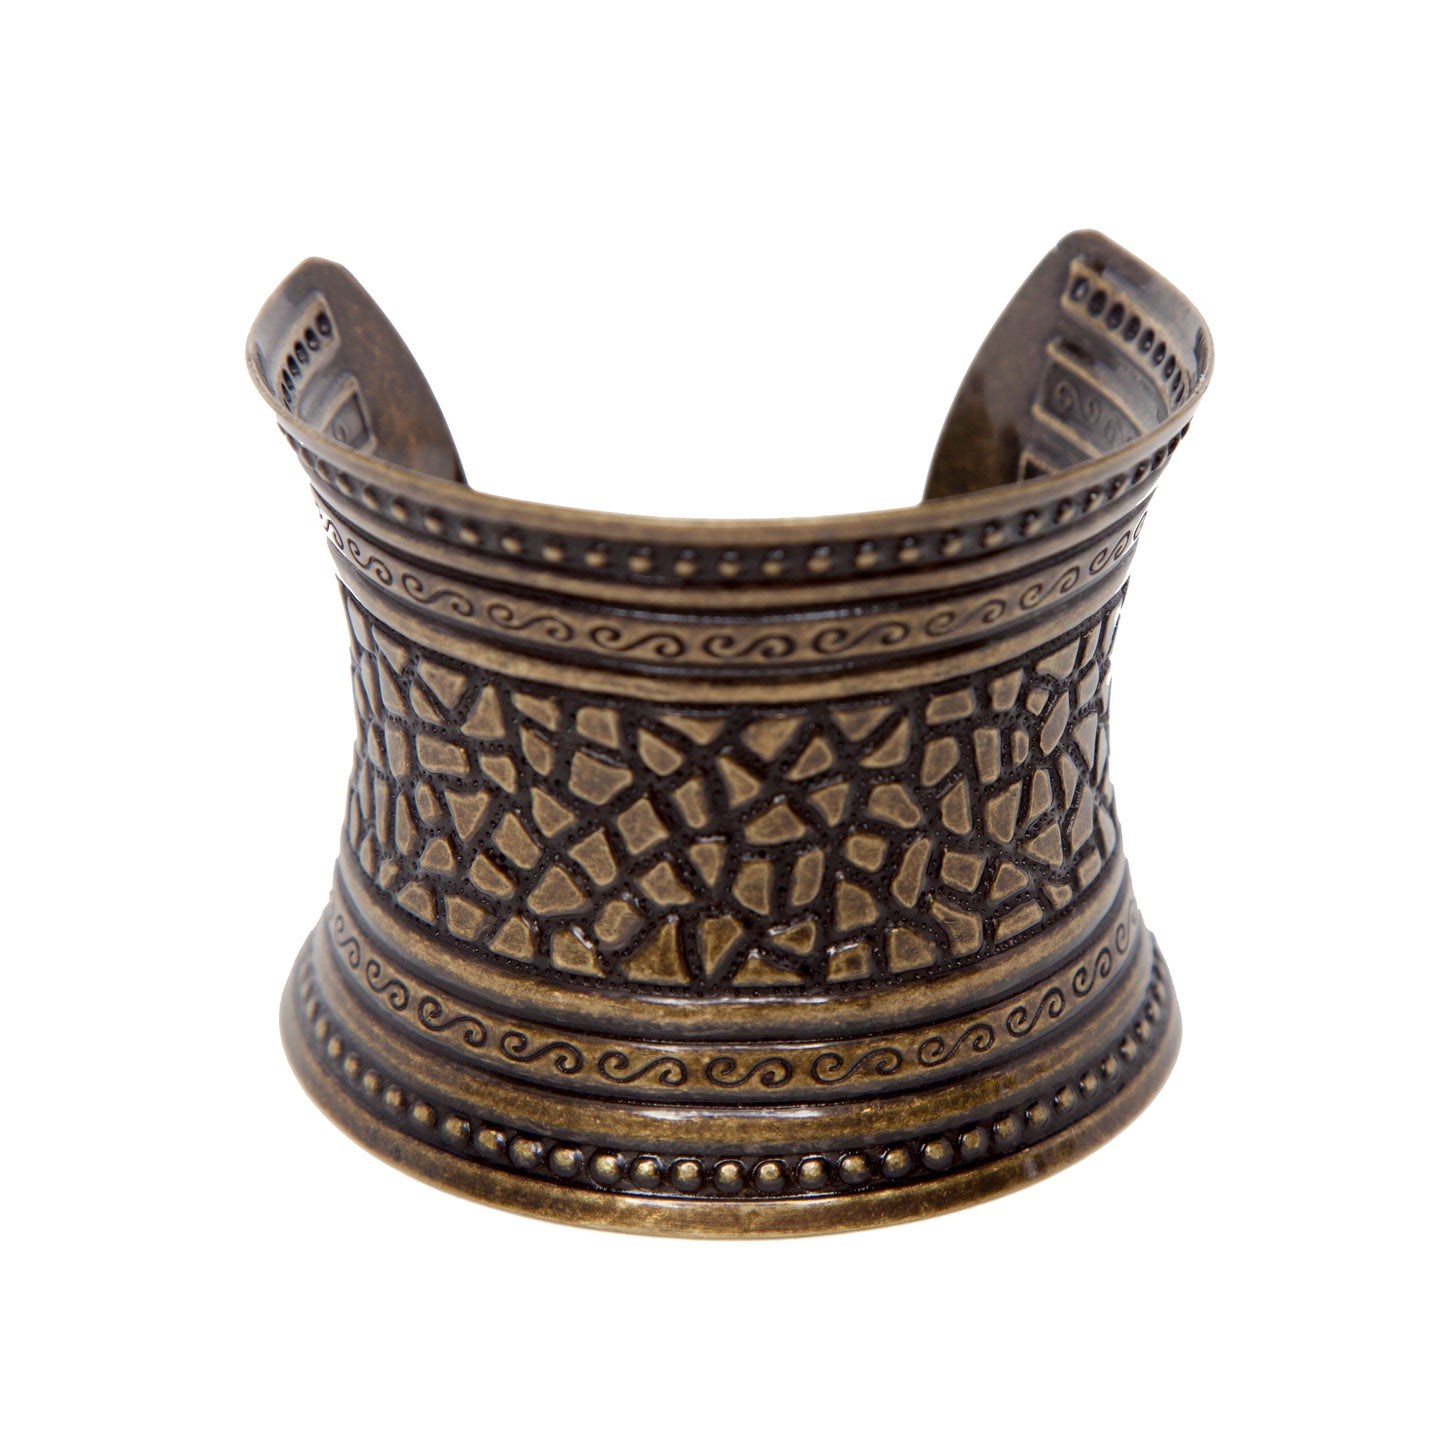 Tribal Cracked Look Antique Gold Cuff